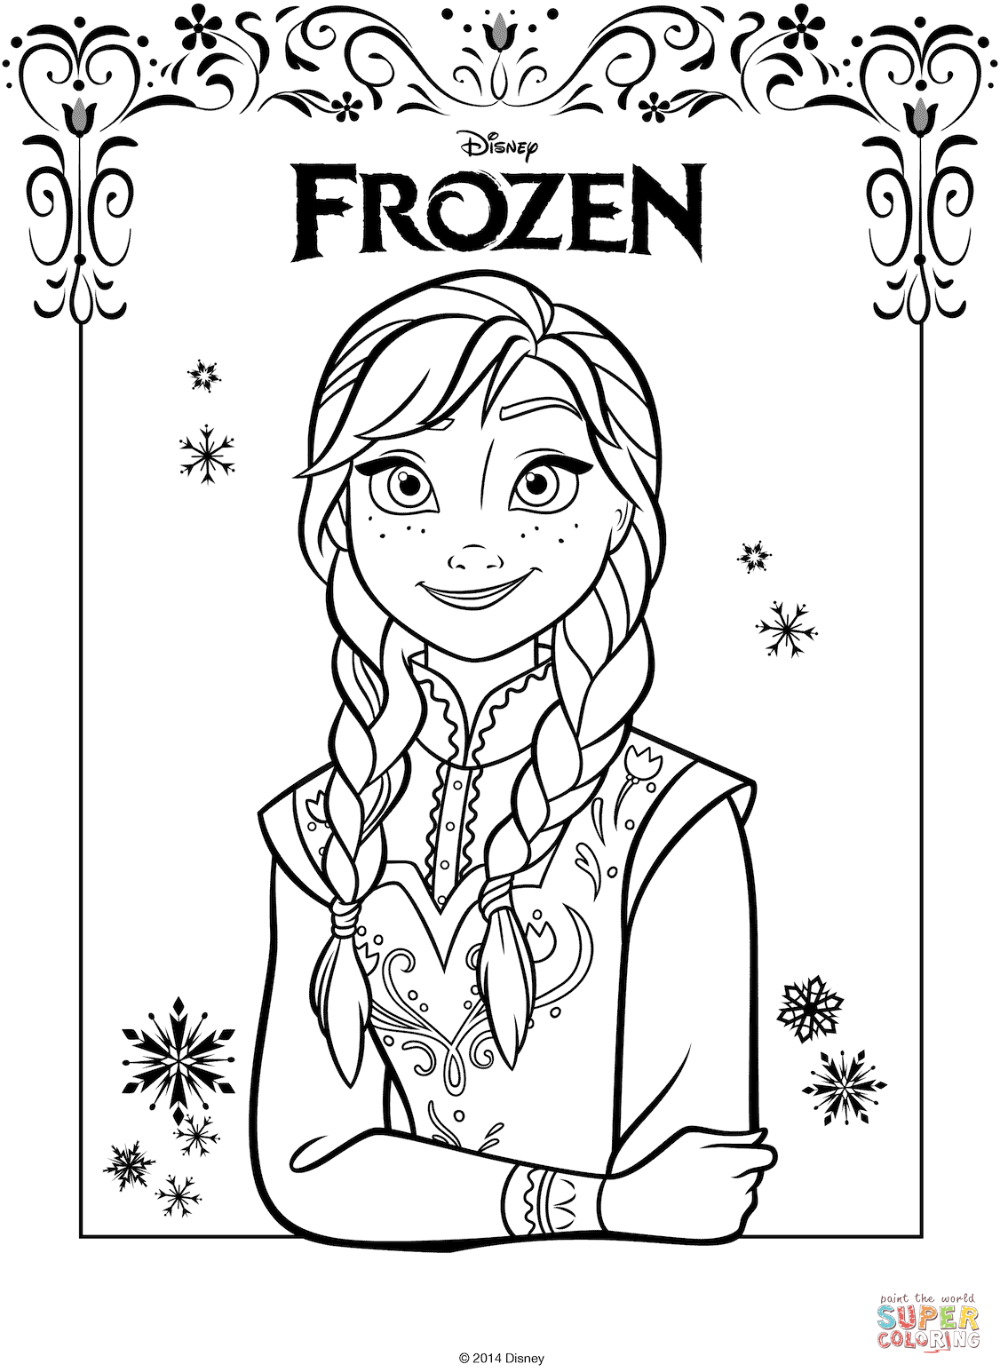 Anna from the frozen movie coloring page free printable coloring pages frozen coloring pages frozen coloring elsa coloring pages